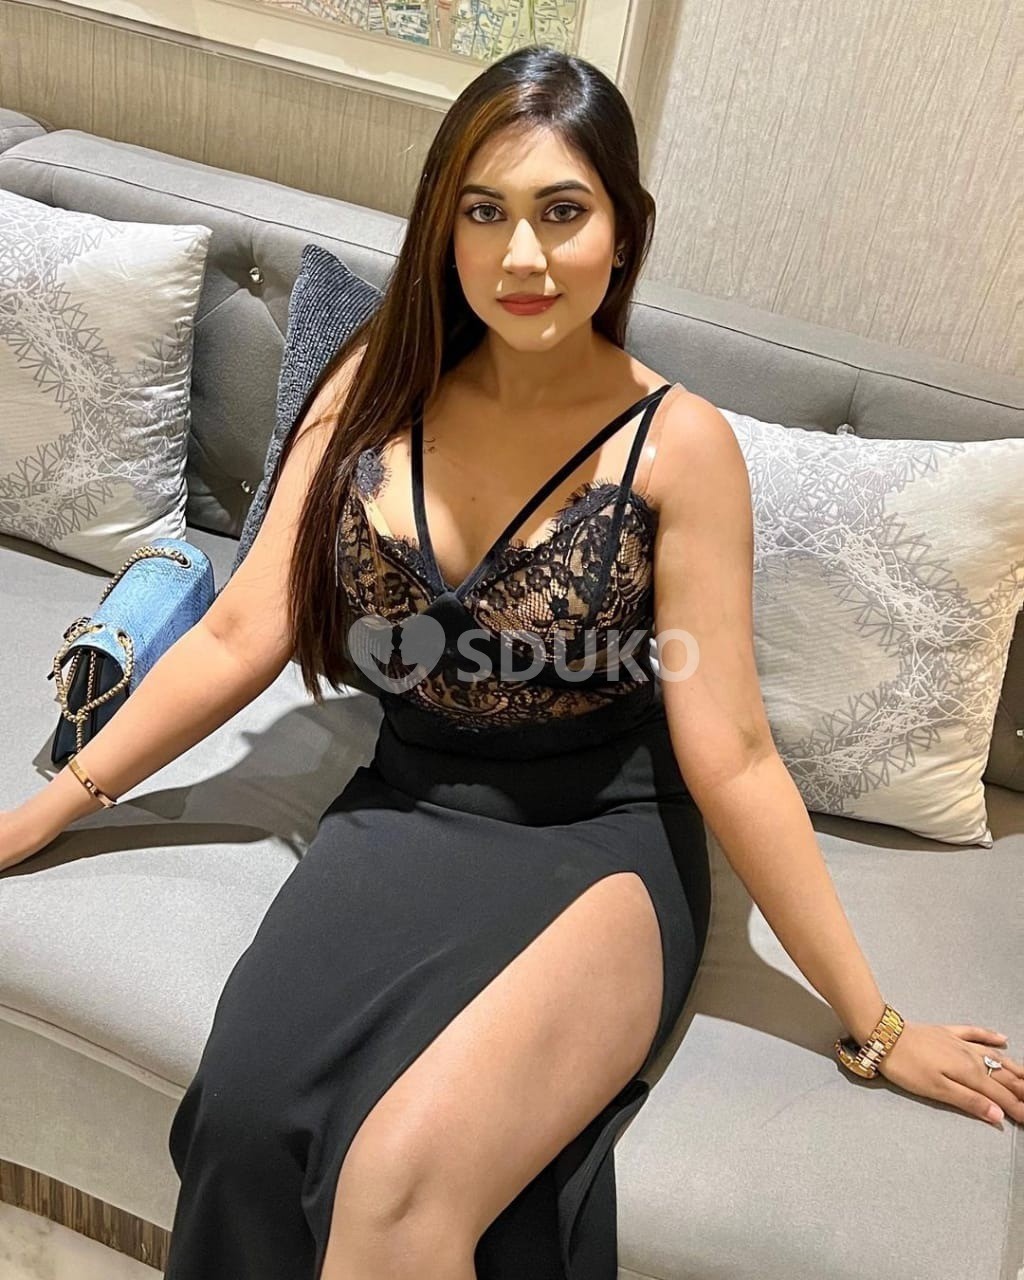 Myself Mahi100% GUARANTEED AND UNLIMITED SHOT BEST HIGH PROFILE AND FULL SAFE AND SECURE AND TODAY LOW PRICE 24 HR VIP B